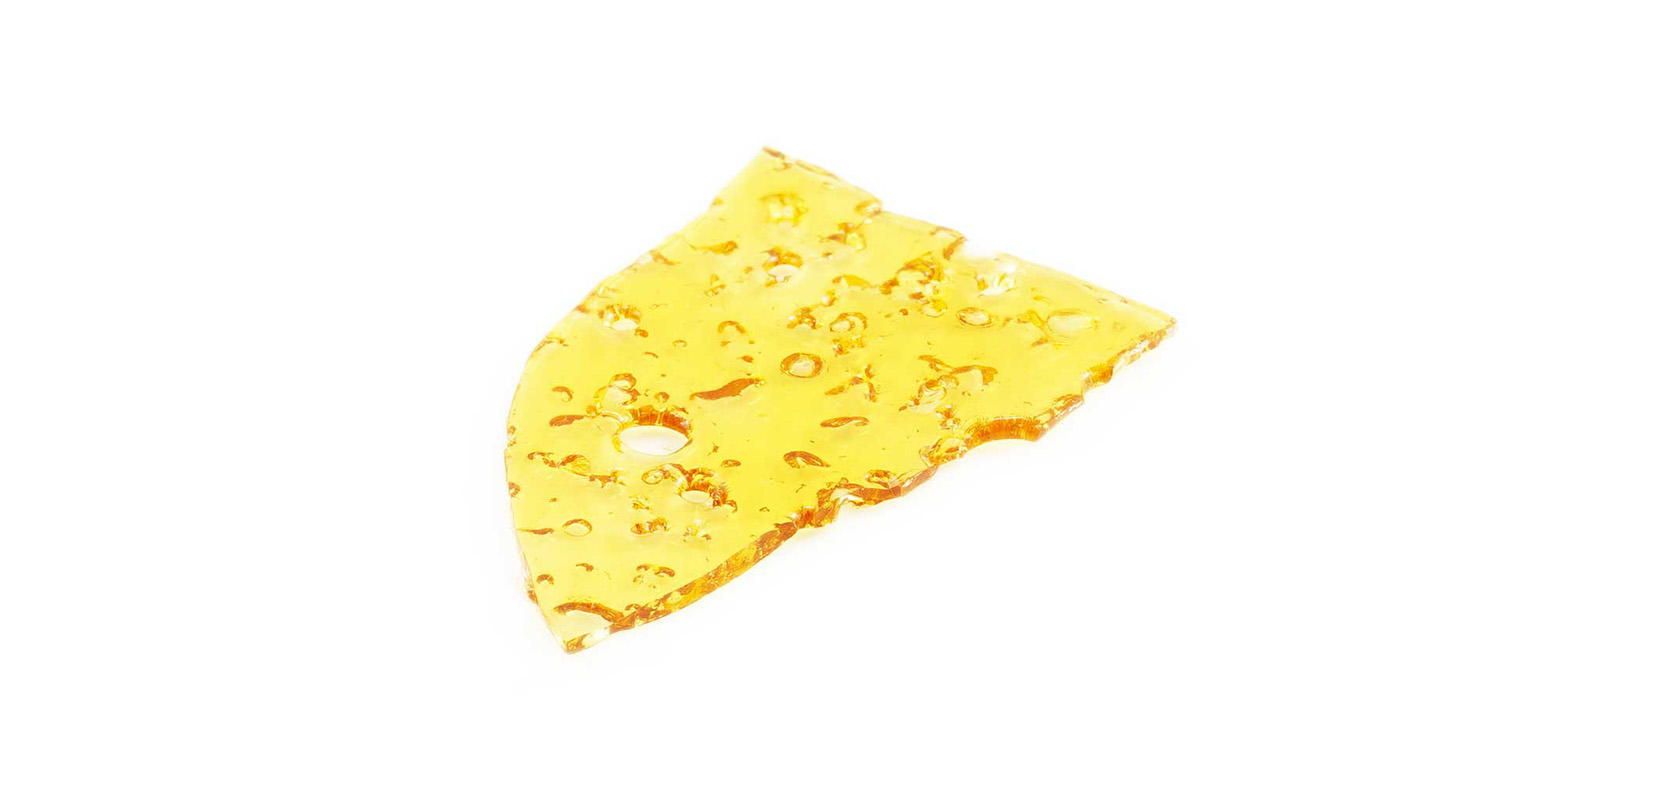 Death Bubba Shatter Cannabis THC concentrates. shatter thc. what is shatter weed?